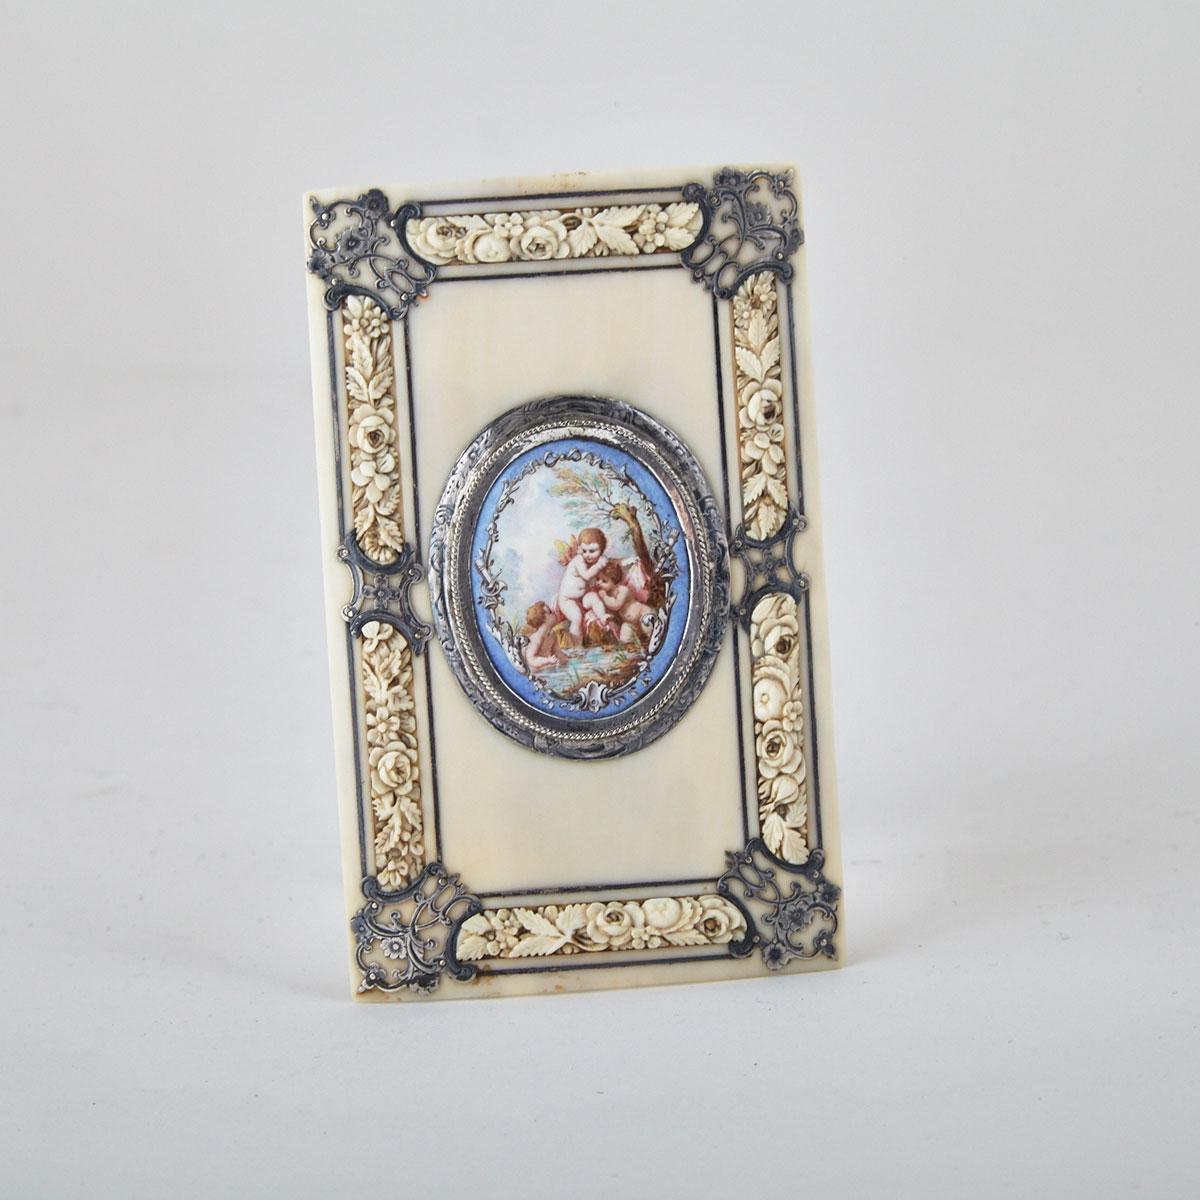 Viennese Porcelain Enamel Plaque and Silver Mounted Ivory Book Cover, late 19th century